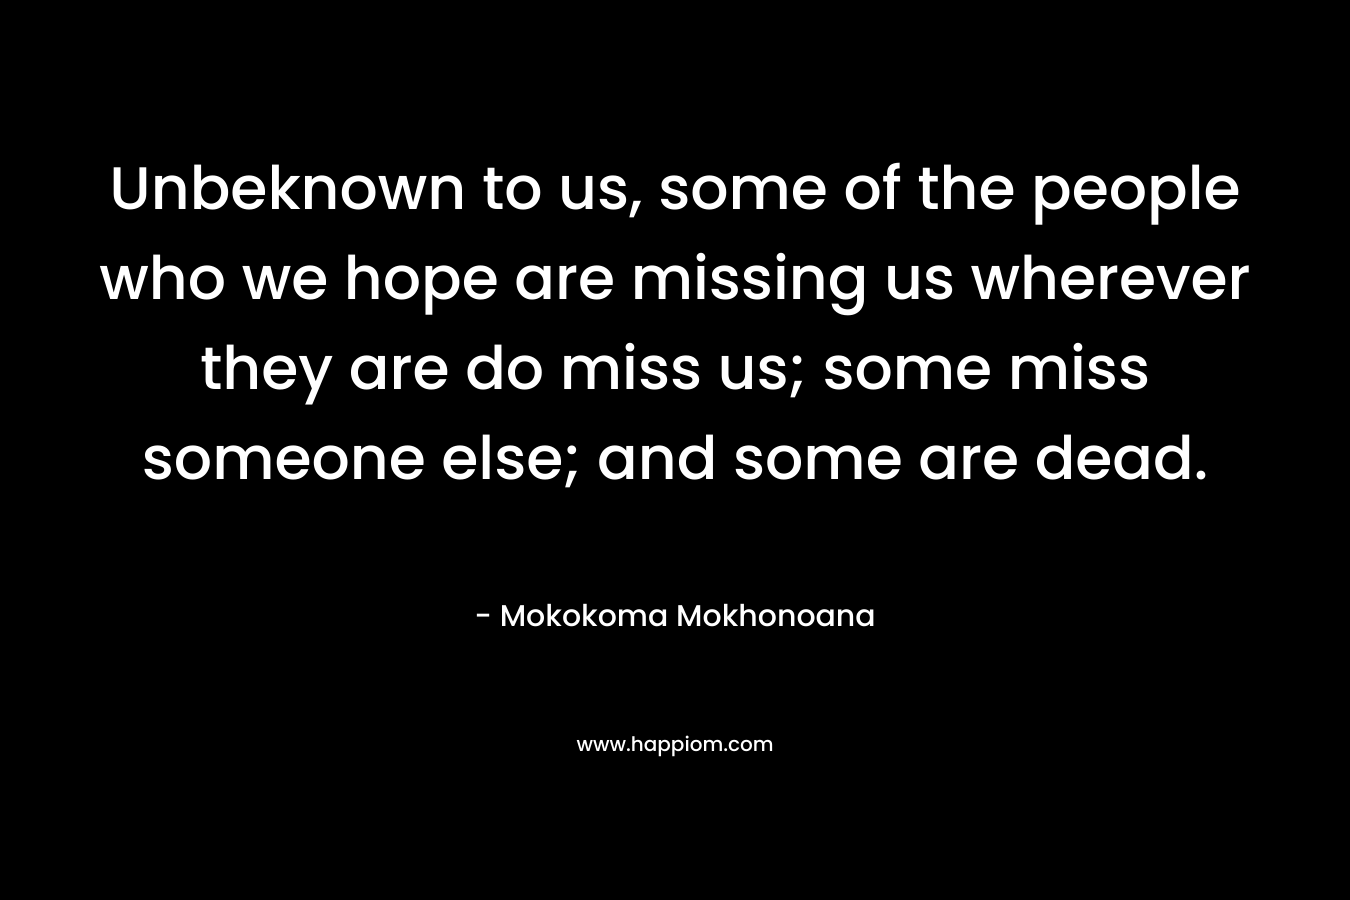 Unbeknown to us, some of the people who we hope are missing us wherever they are do miss us; some miss someone else; and some are dead.